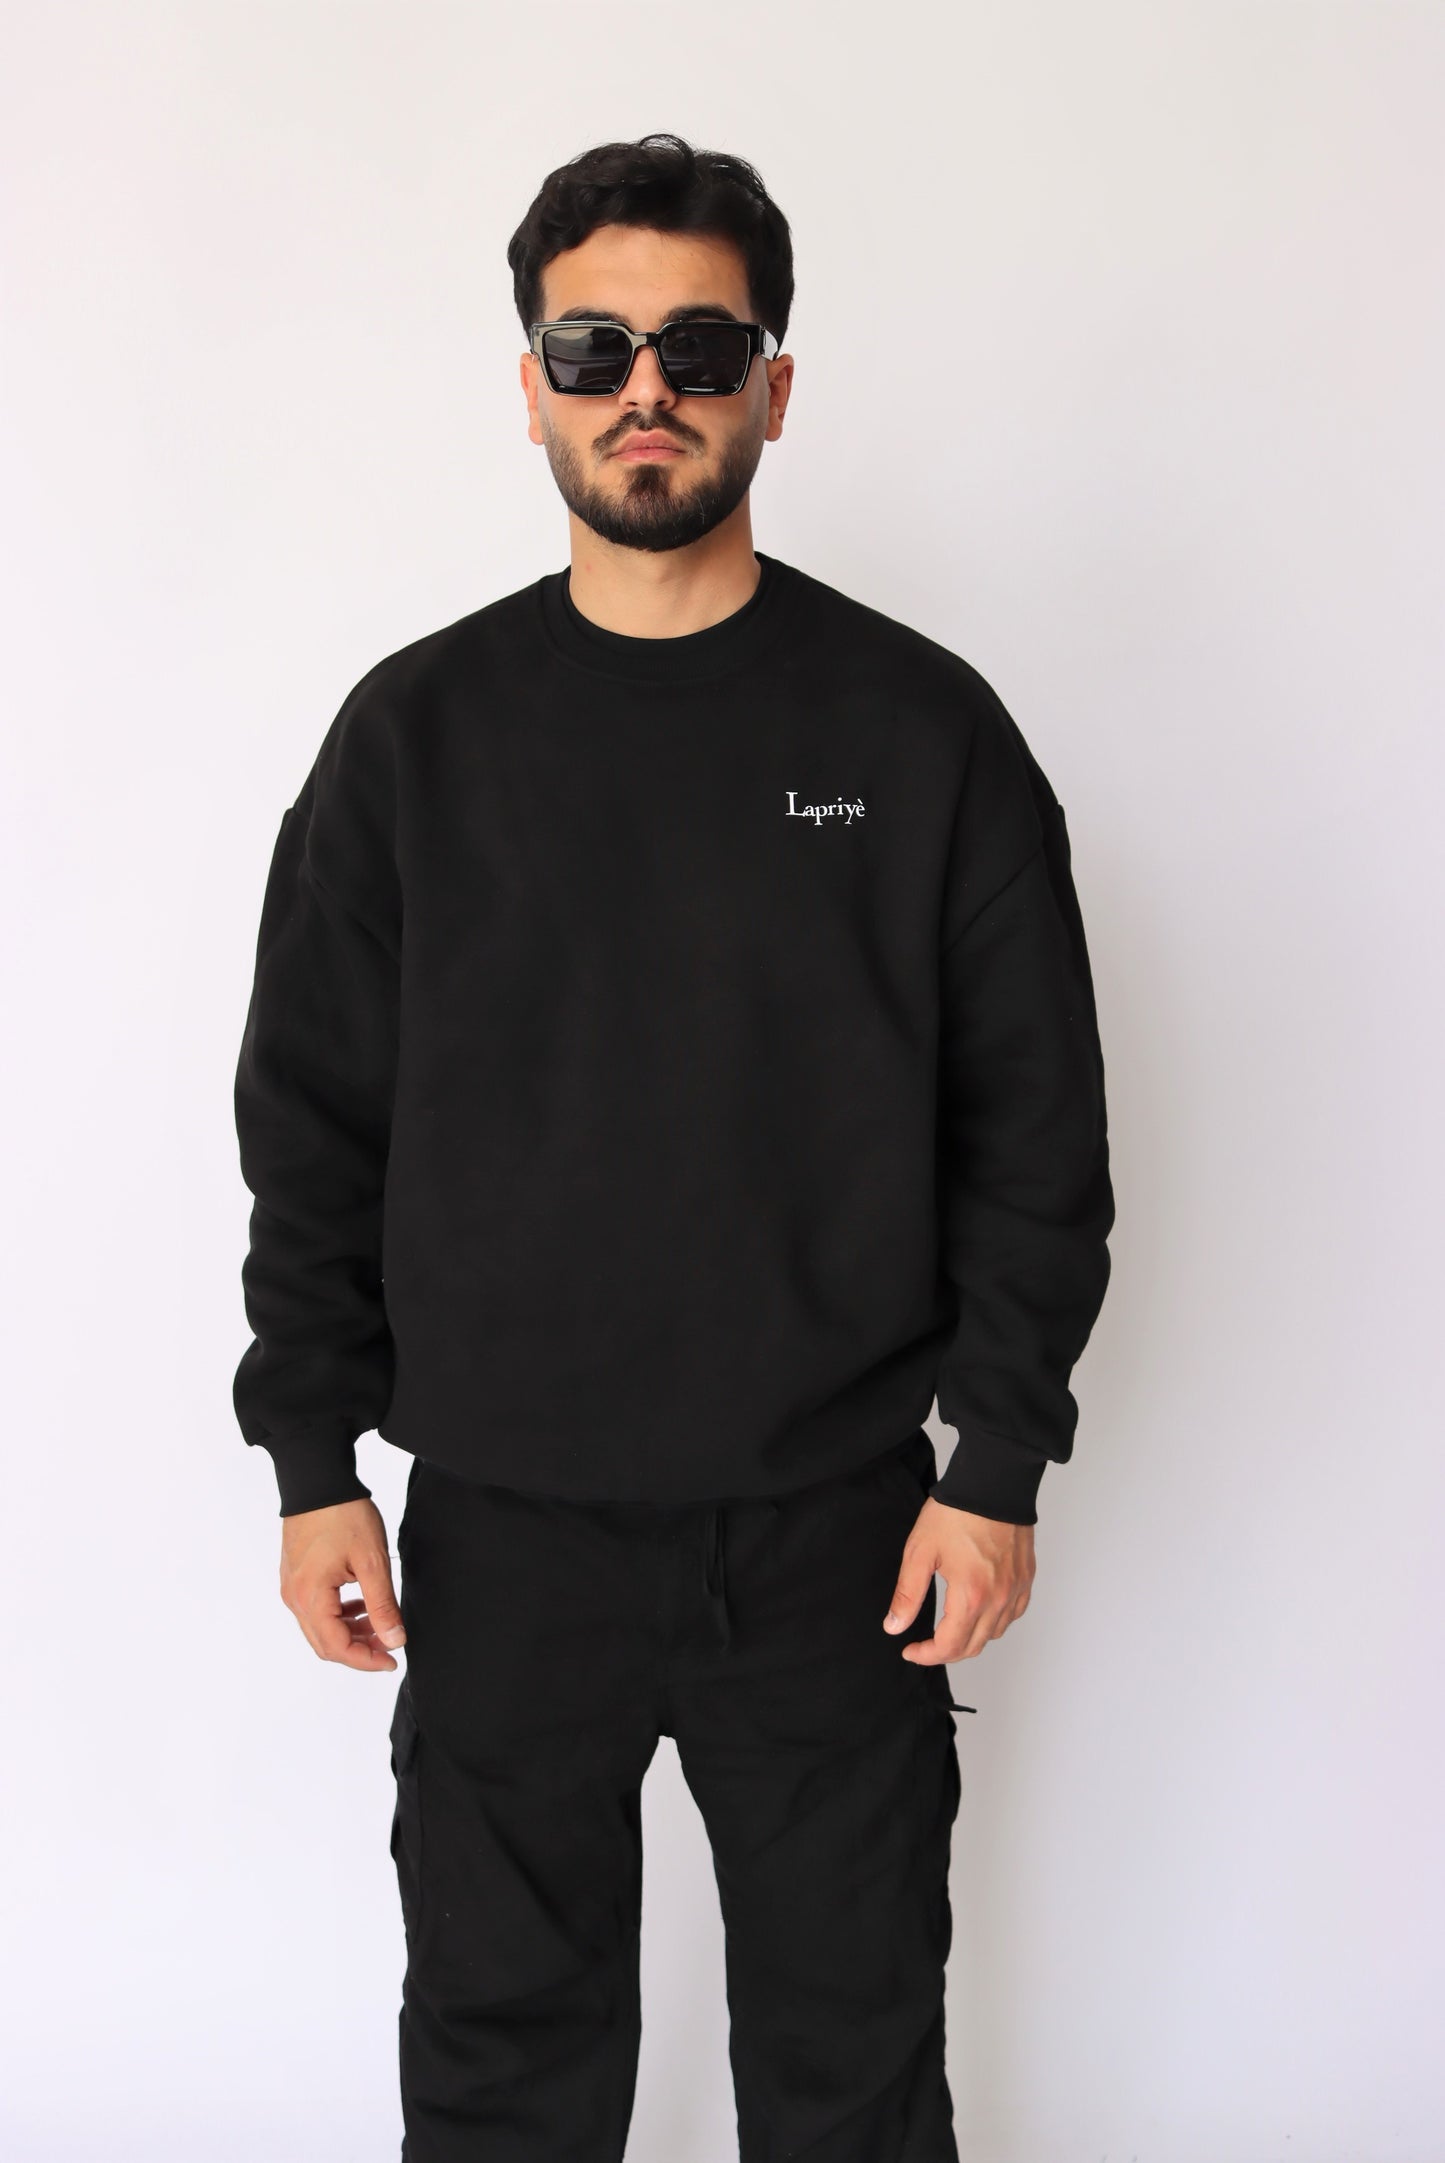 LOYALTY MEANS EVERYTHING OVERSIZED SWEATER IN BLACK